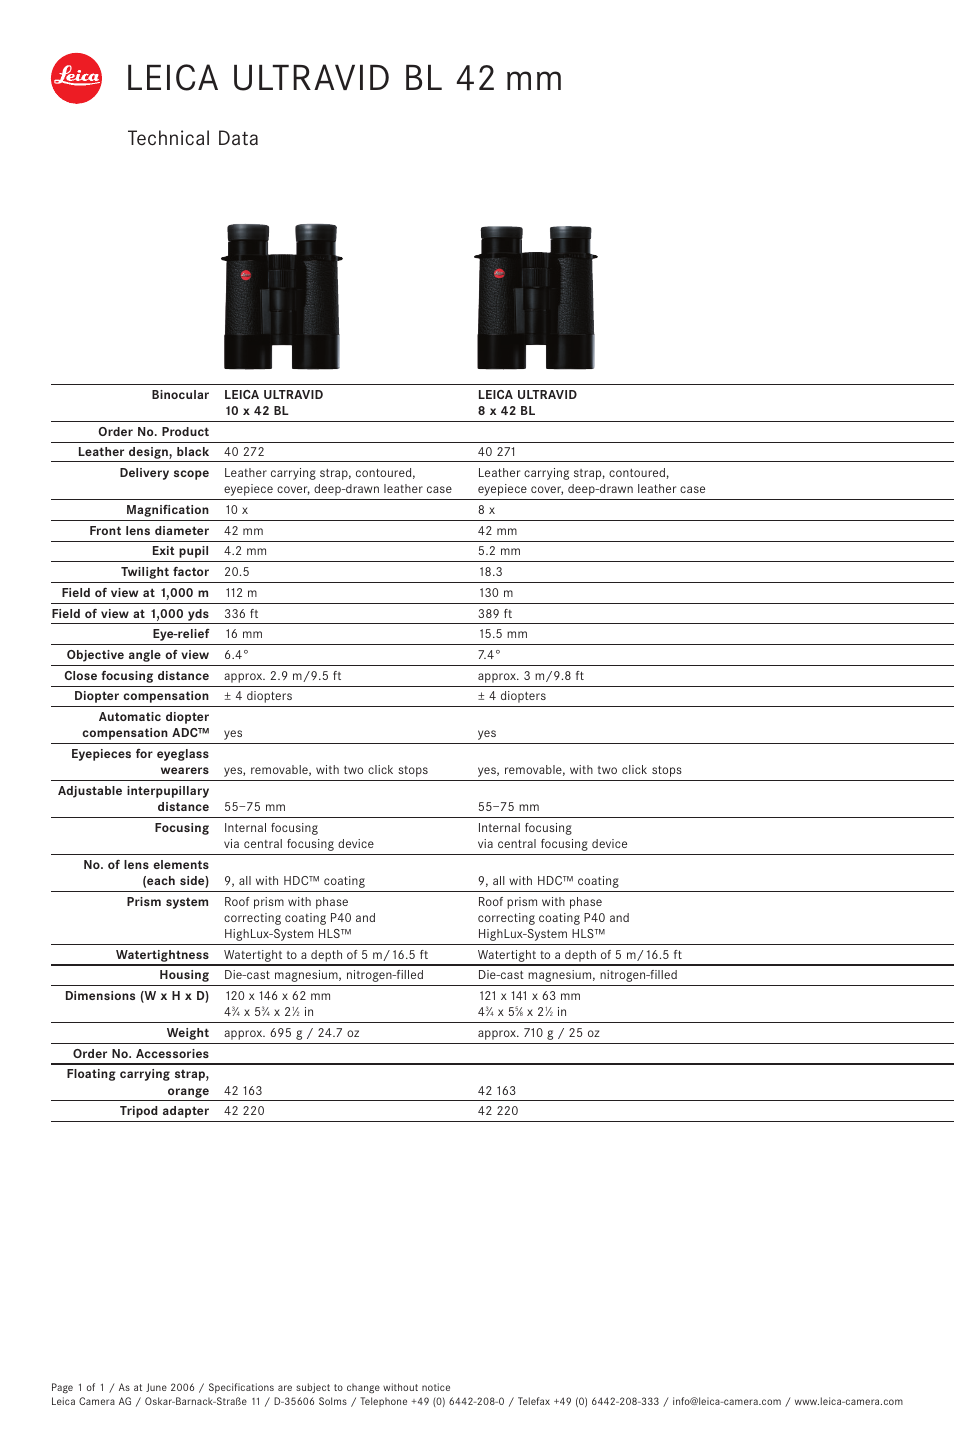 LEICA ULTRAVID BL 42 User Manual | 1 page